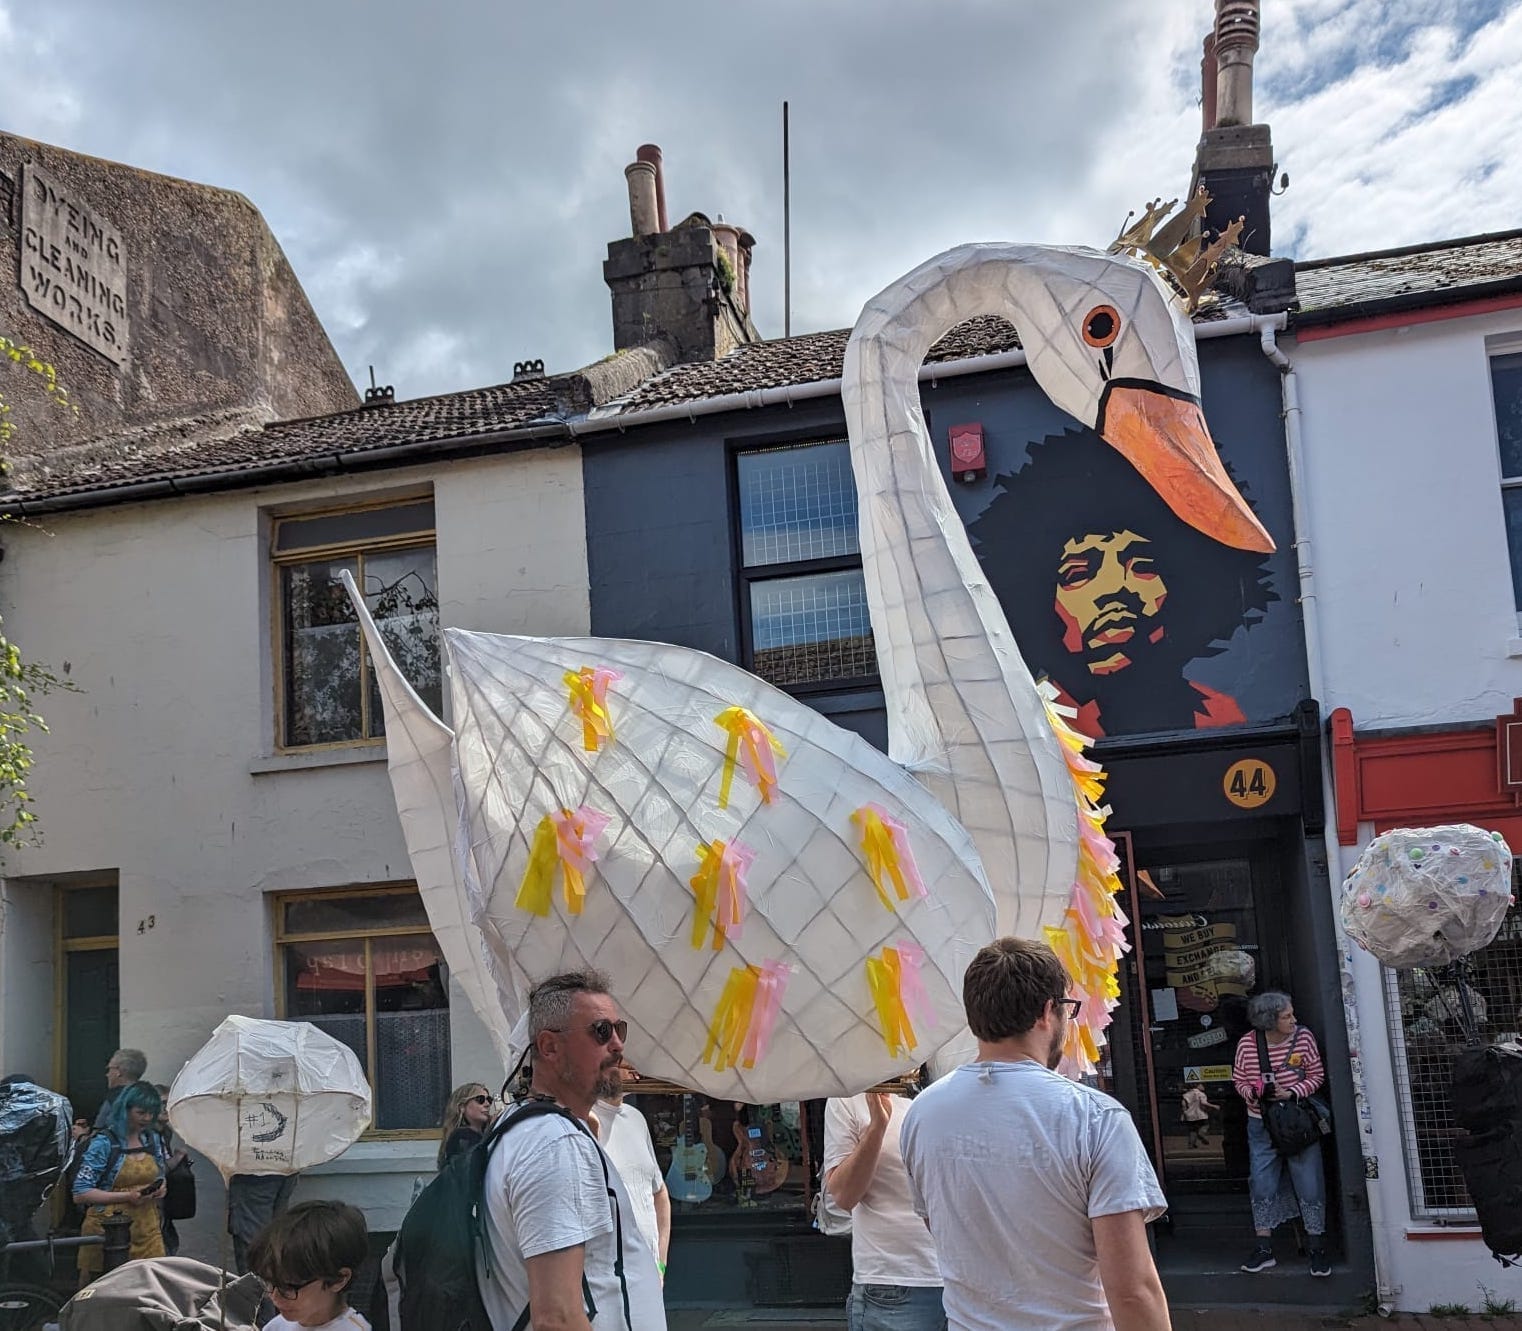 A photograph showing a large willow and tissue paper swan being walked through the streets of Brighton